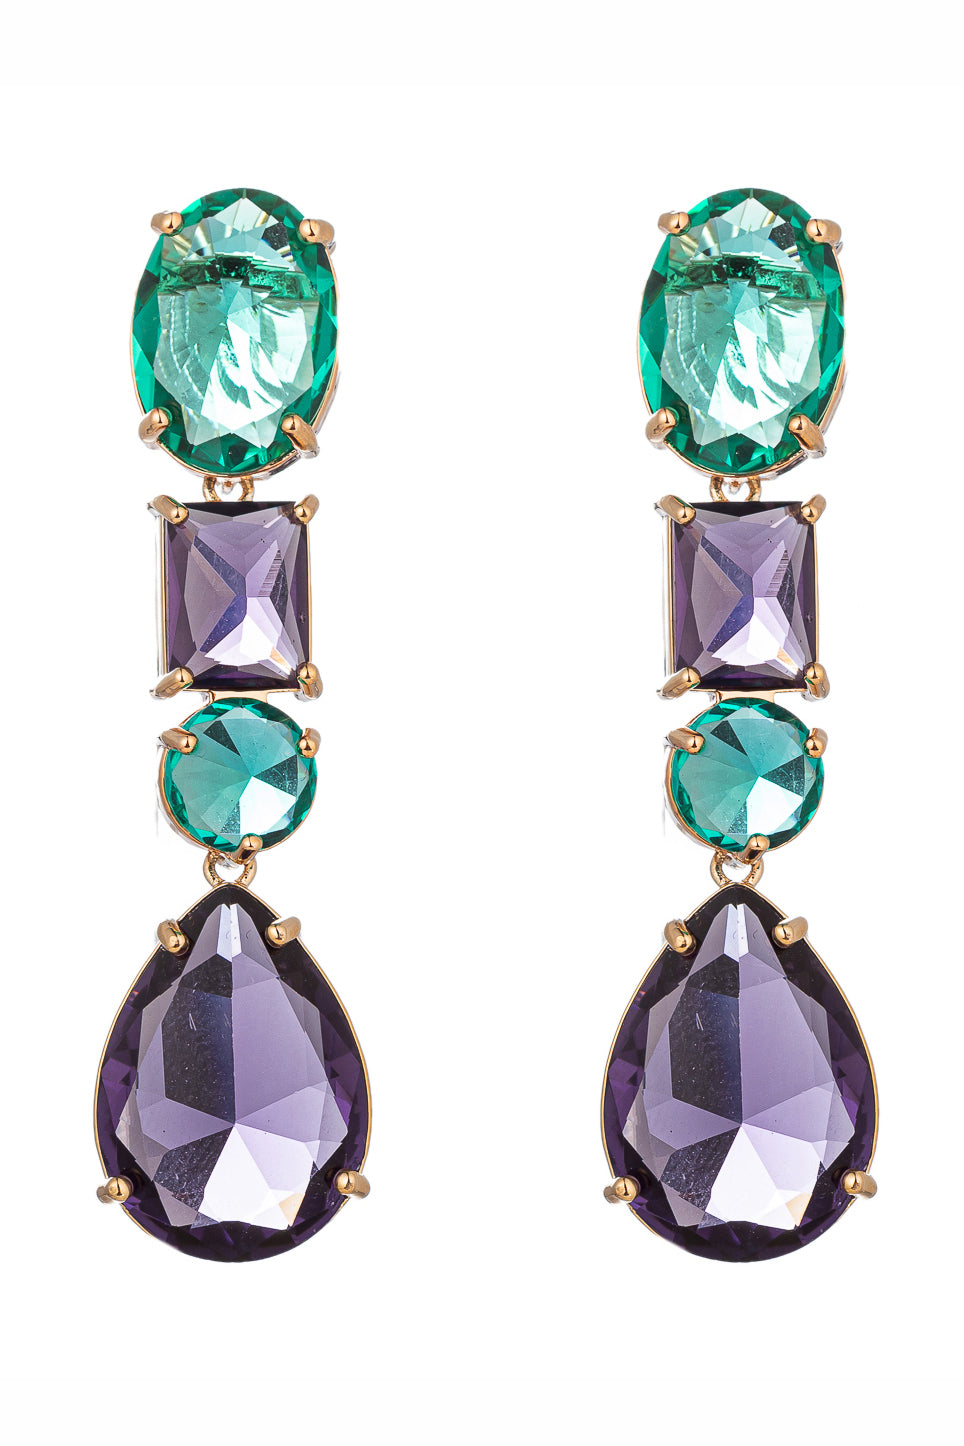 Gold tone brass drop earrings with green and purple CZ crystals.